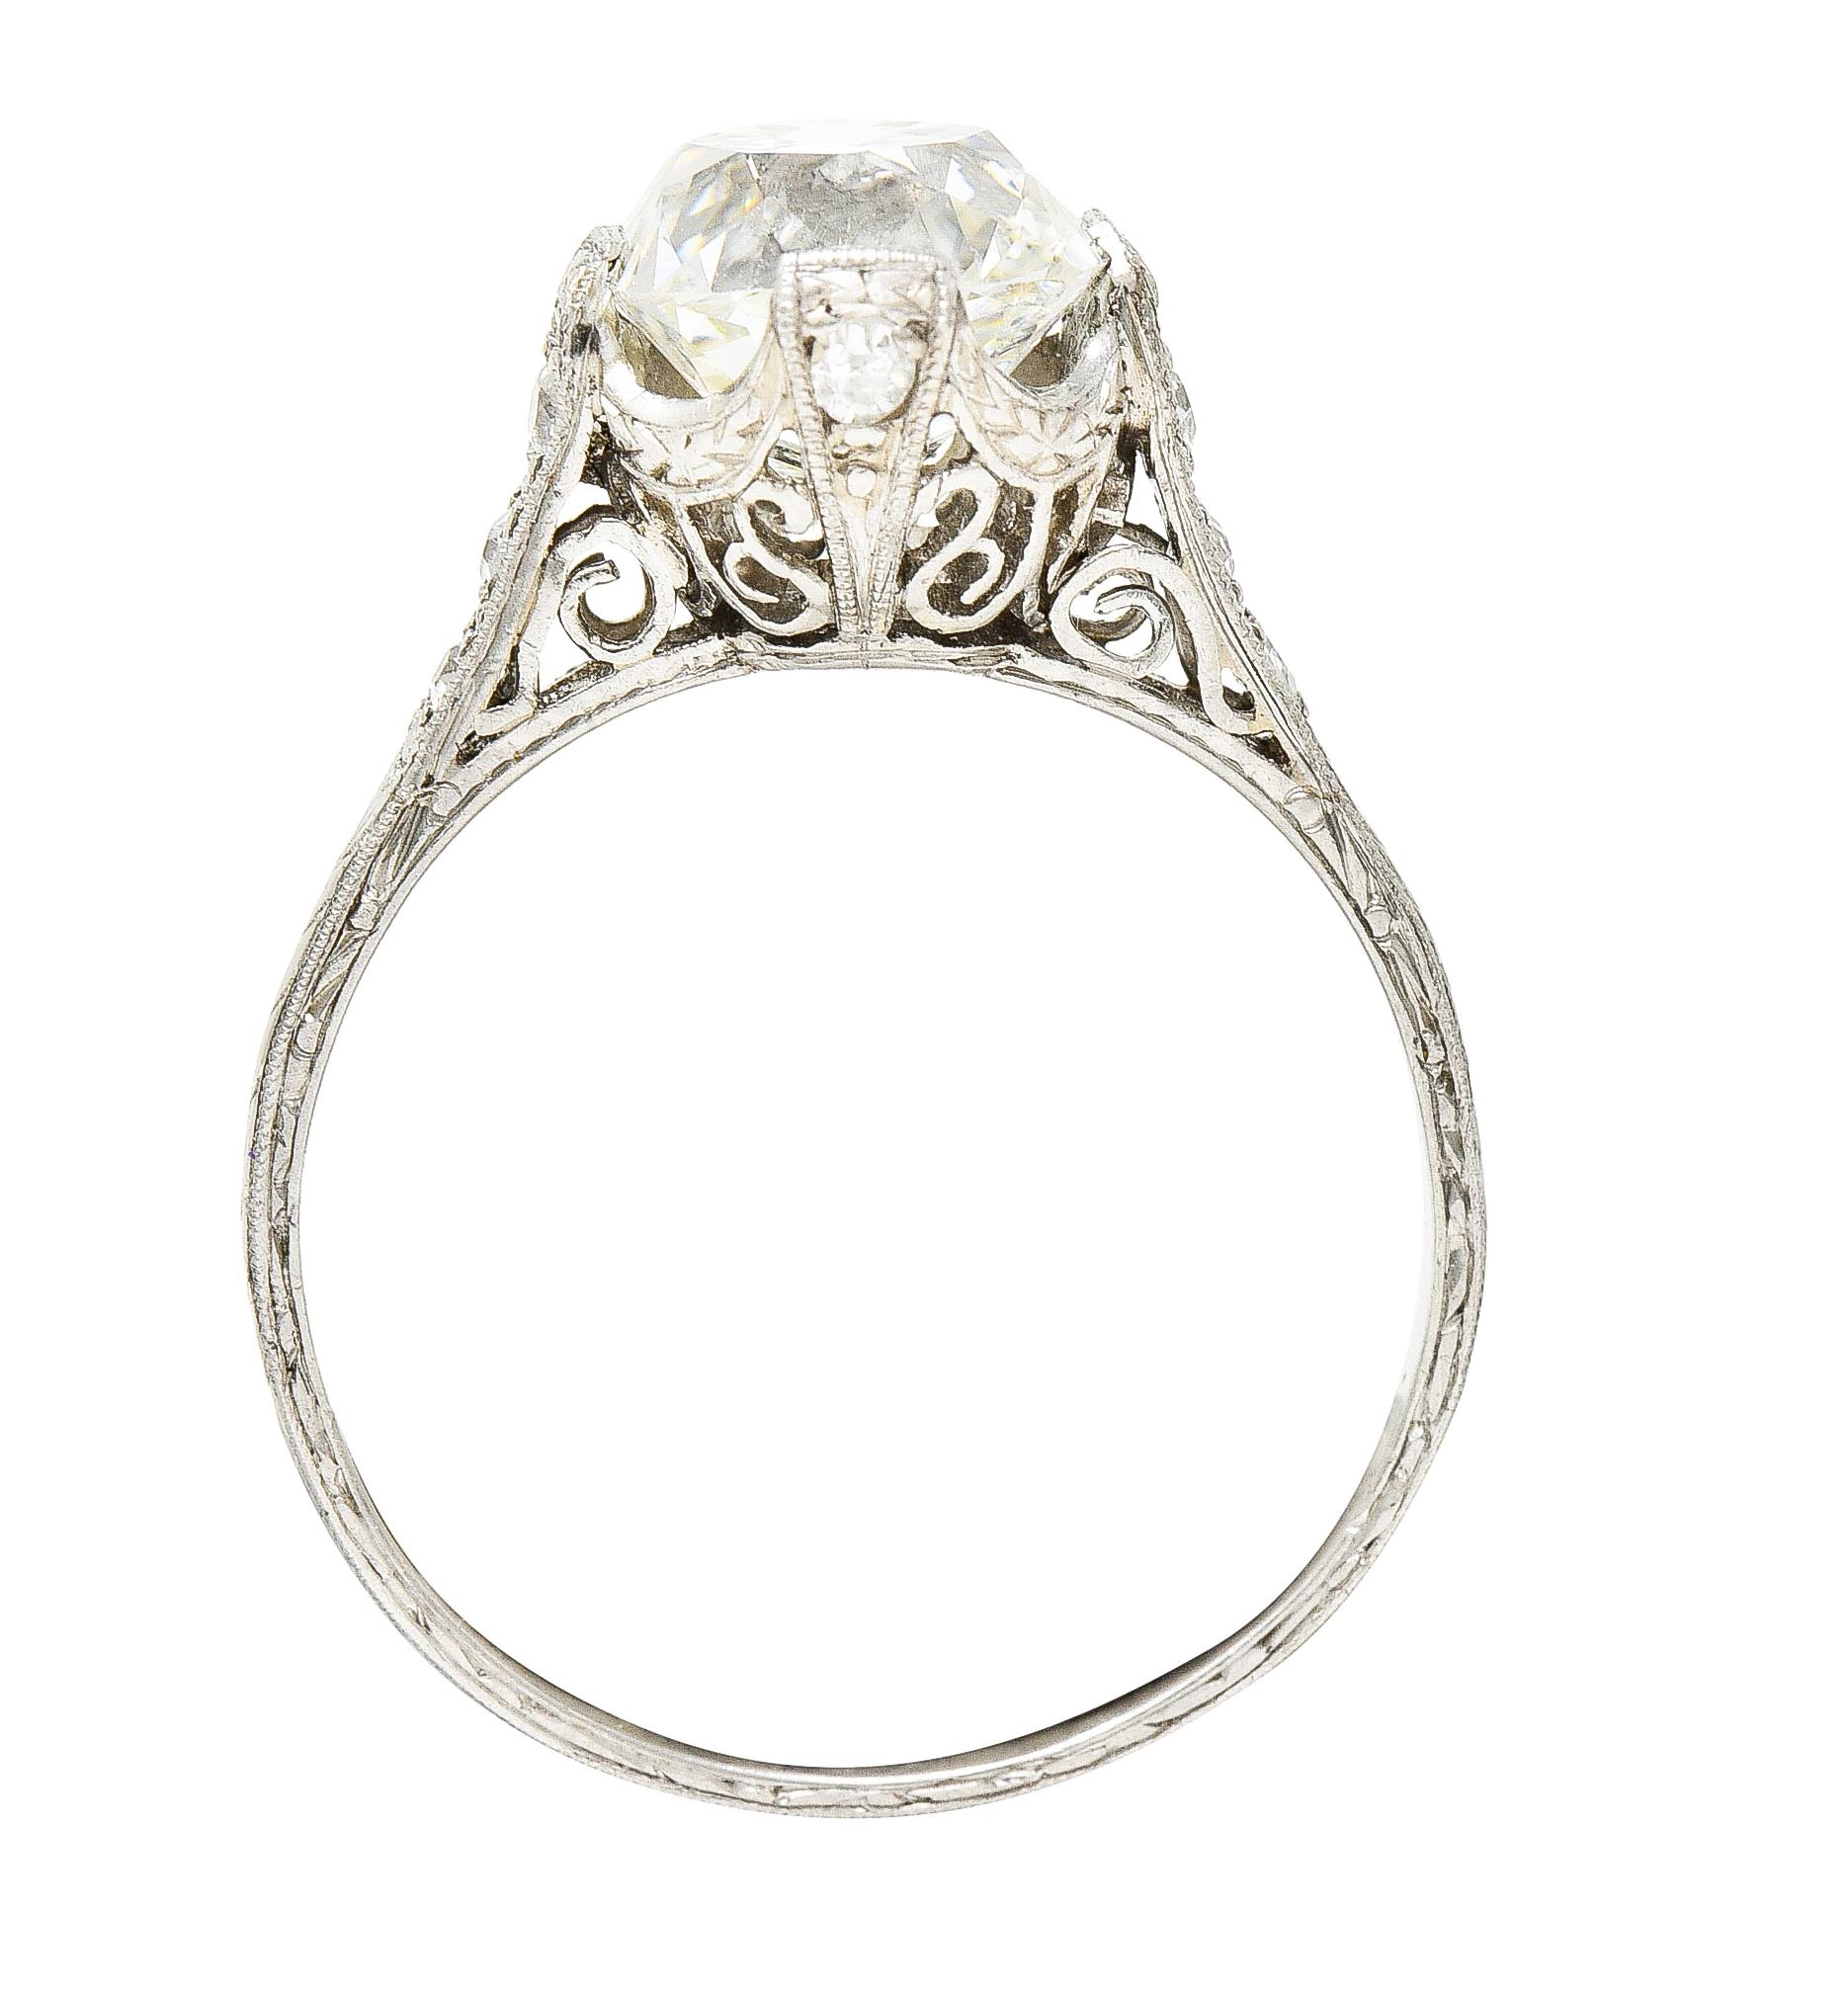 Featuring an old mine cut diamond weighing 2.58 carats - J color with VS1 clarity. Set by decorative wide prongs in a pierced head with a deeply swagged basket edge. Flanked by cathedral shoulders accented by single cut diamonds. Weighing in total